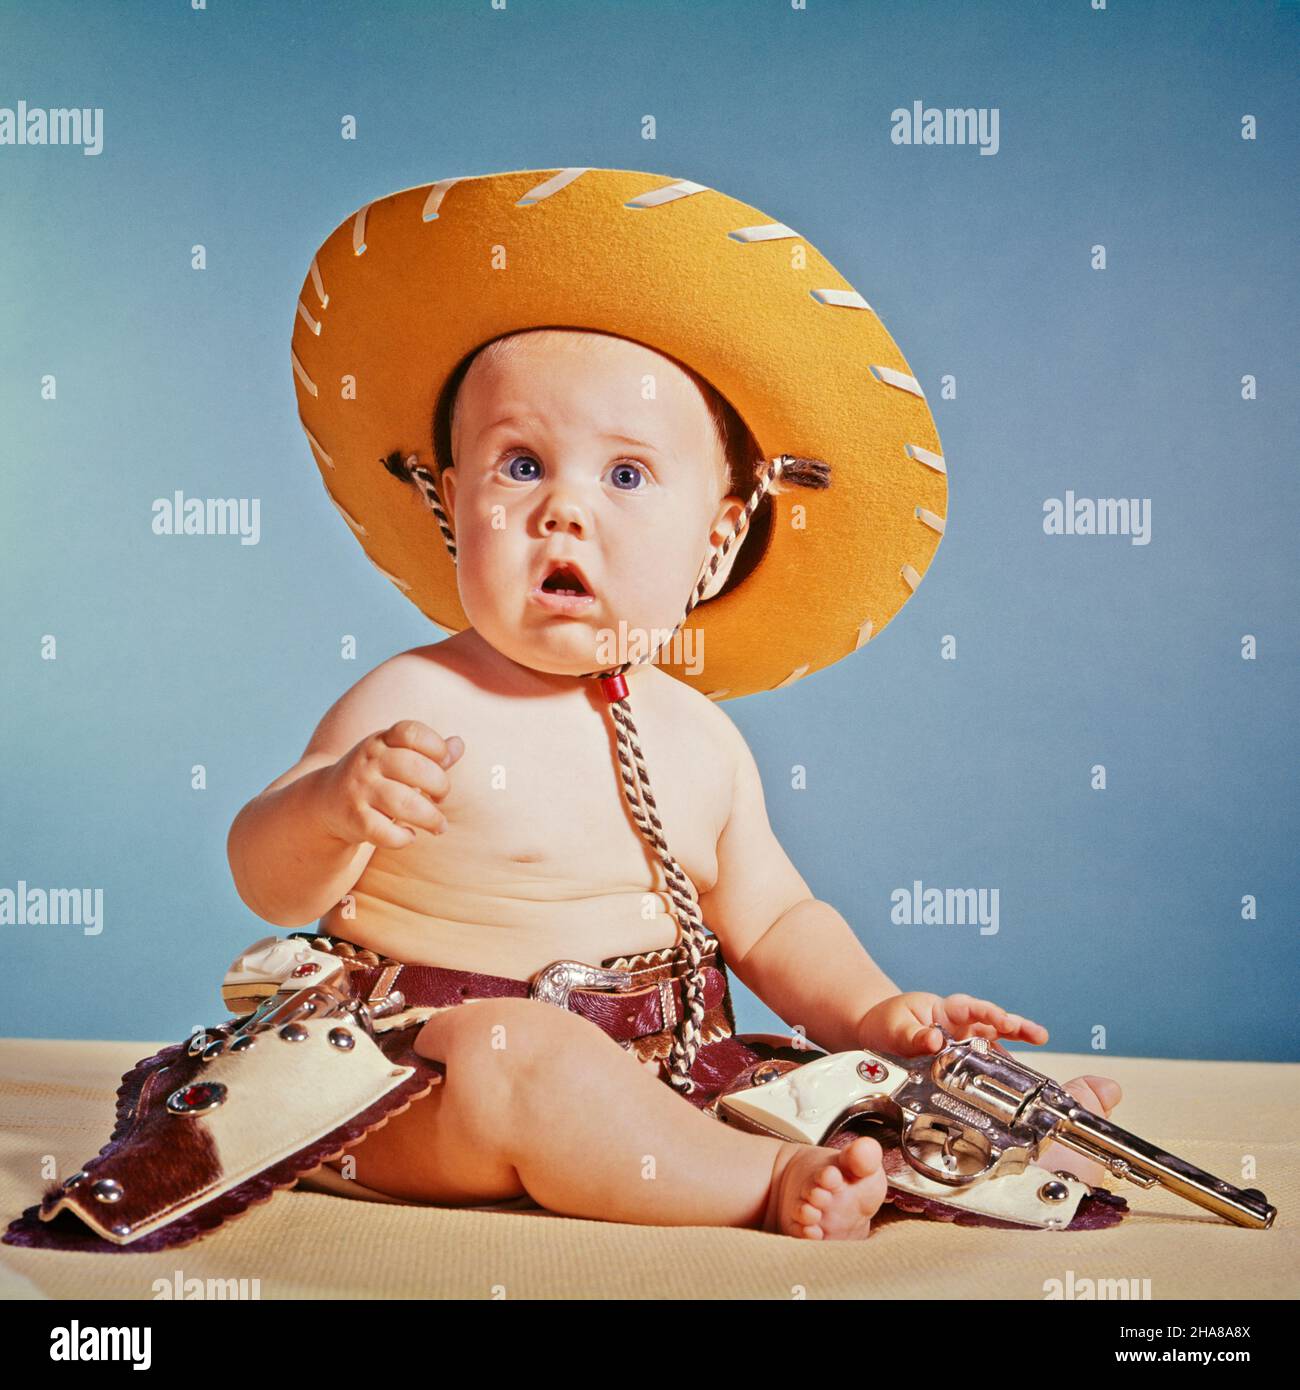 1960s BABY BOY WITH SURPRISED FACIAL EXPRESSION DRESSED AS COWBOY WEARING HAT AND HOLSTER AND GUN - kb6910 HAR001 HARS EYE CONTACT COWBOYS ADVENTURE EXCITEMENT BUNS SUPPORT HOLSTERS BABY BOY FIREARM FIREARMS JUVENILES CAUCASIAN ETHNICITY HAR001 OLD FASHIONED Stock Photo